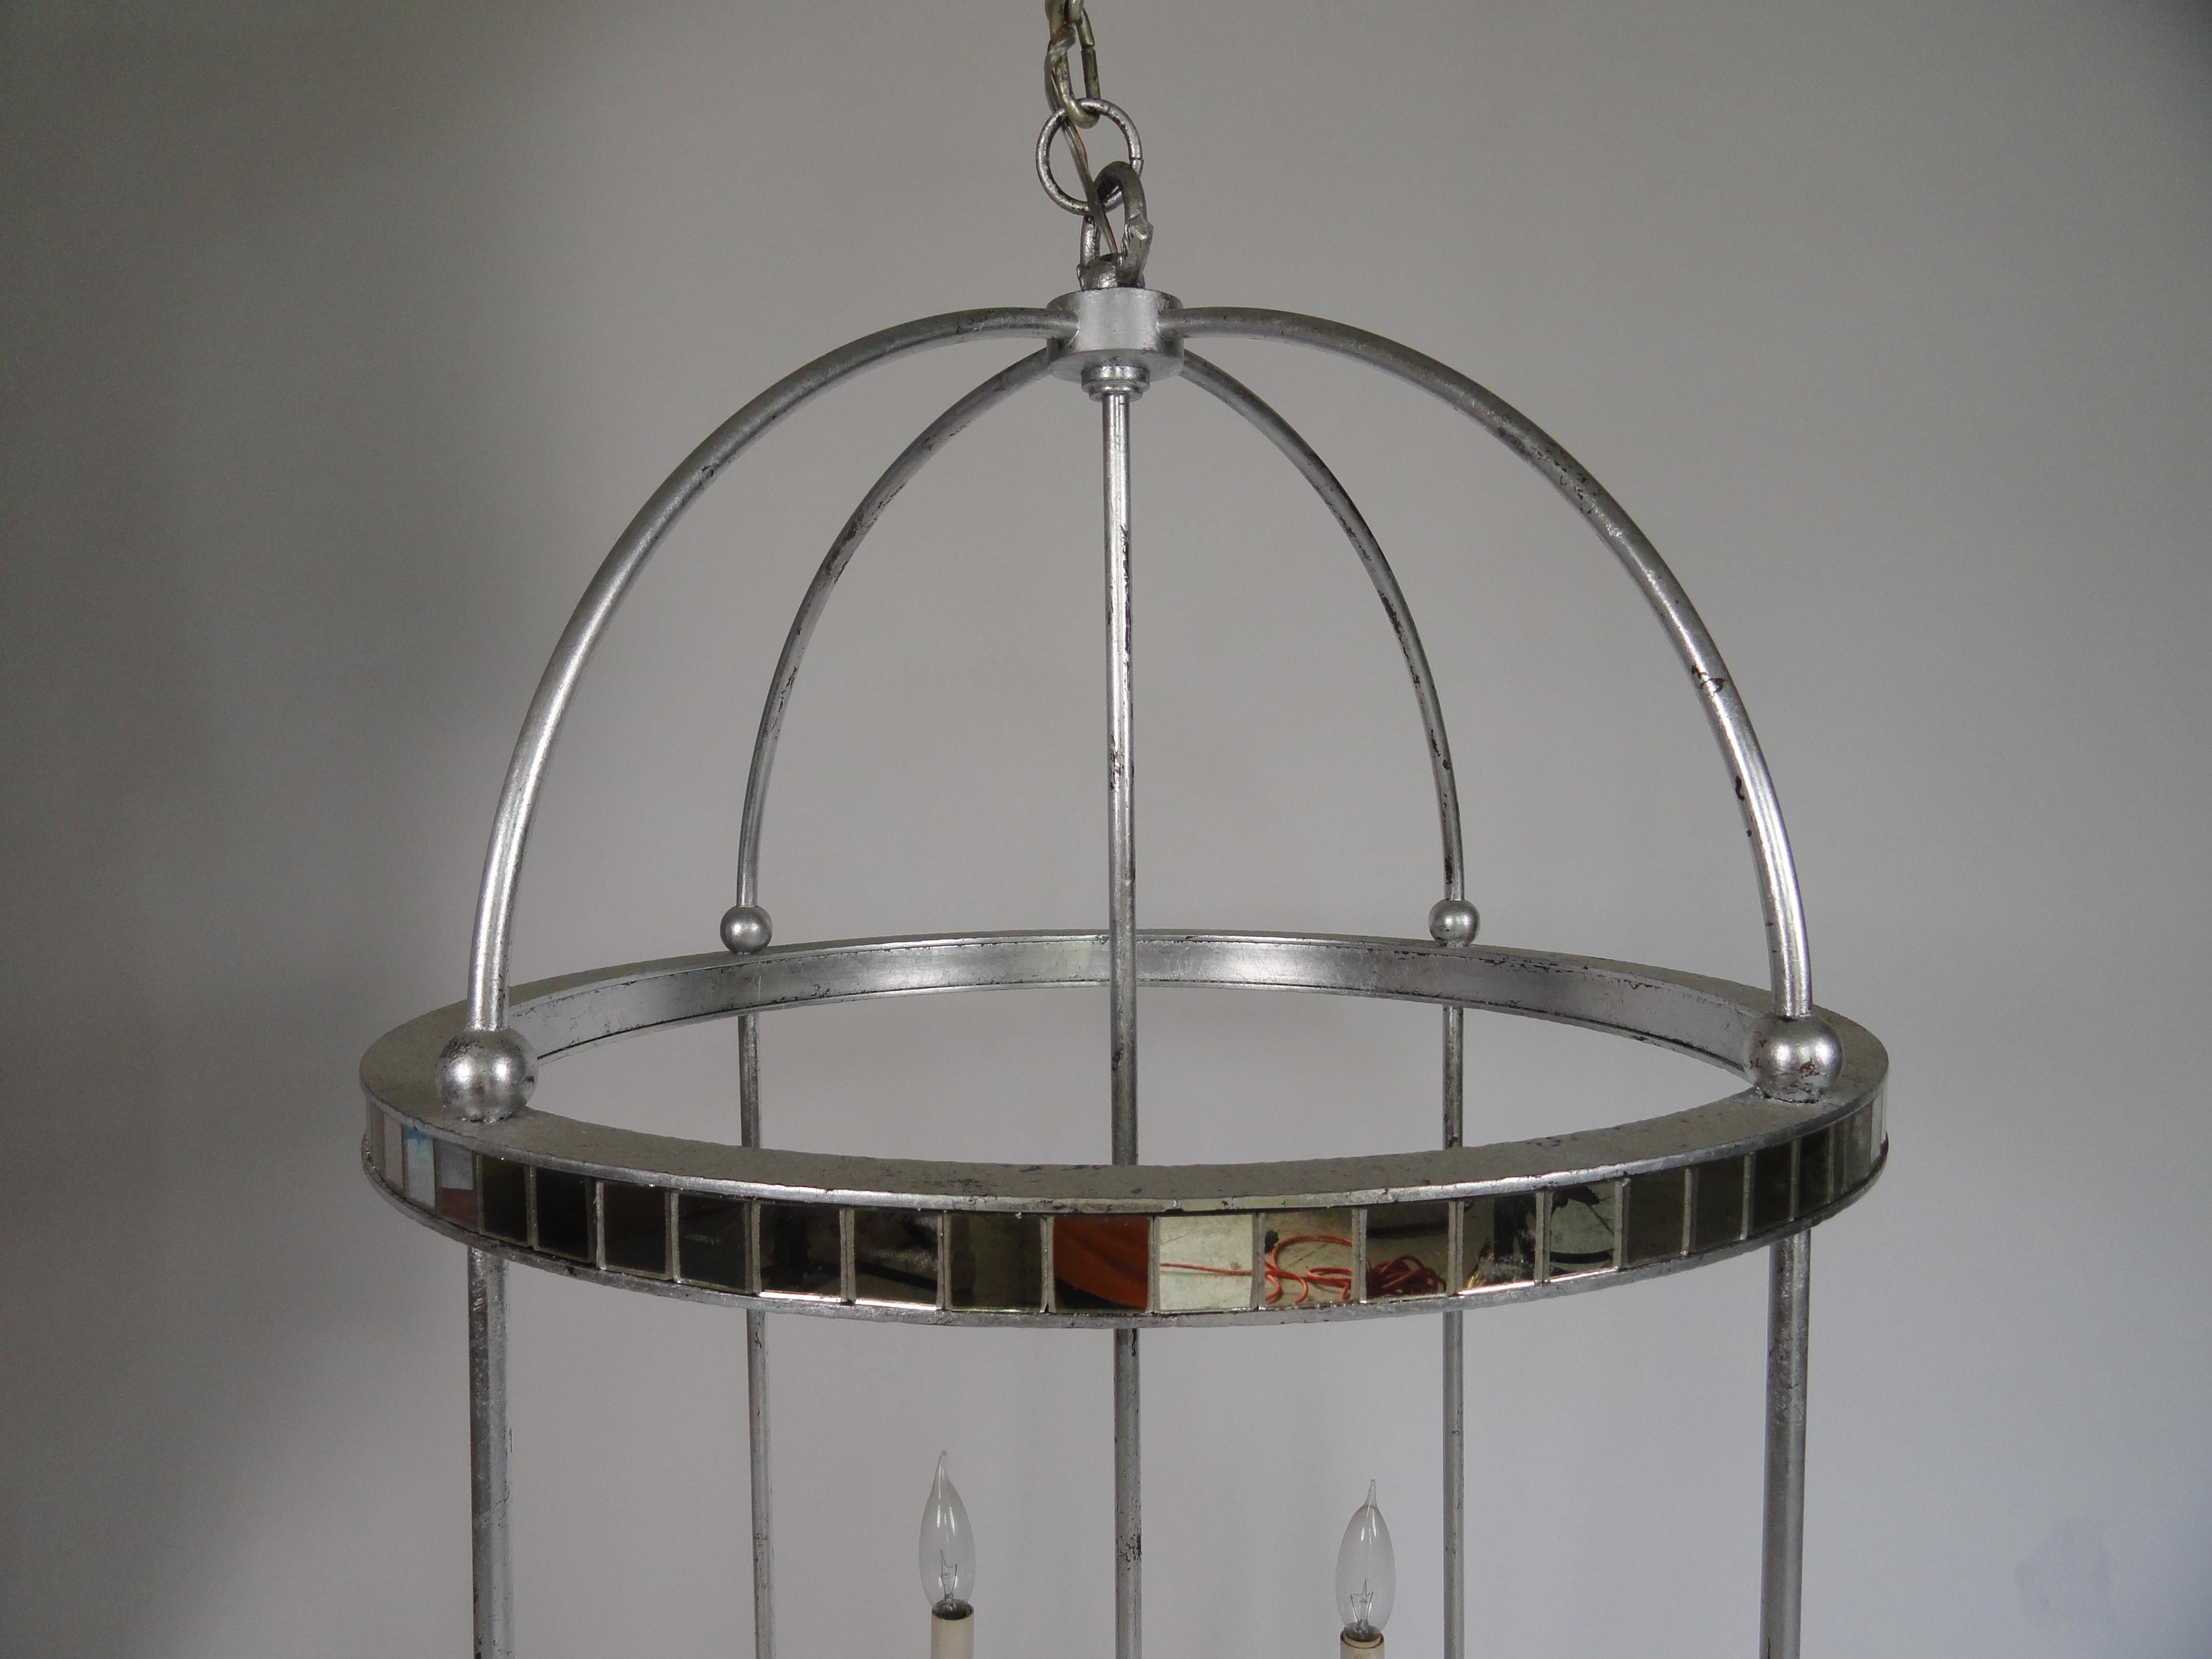 Late 20th century metal and mirrored four-light chandelier in silver-leaf finish.
Measure: 46